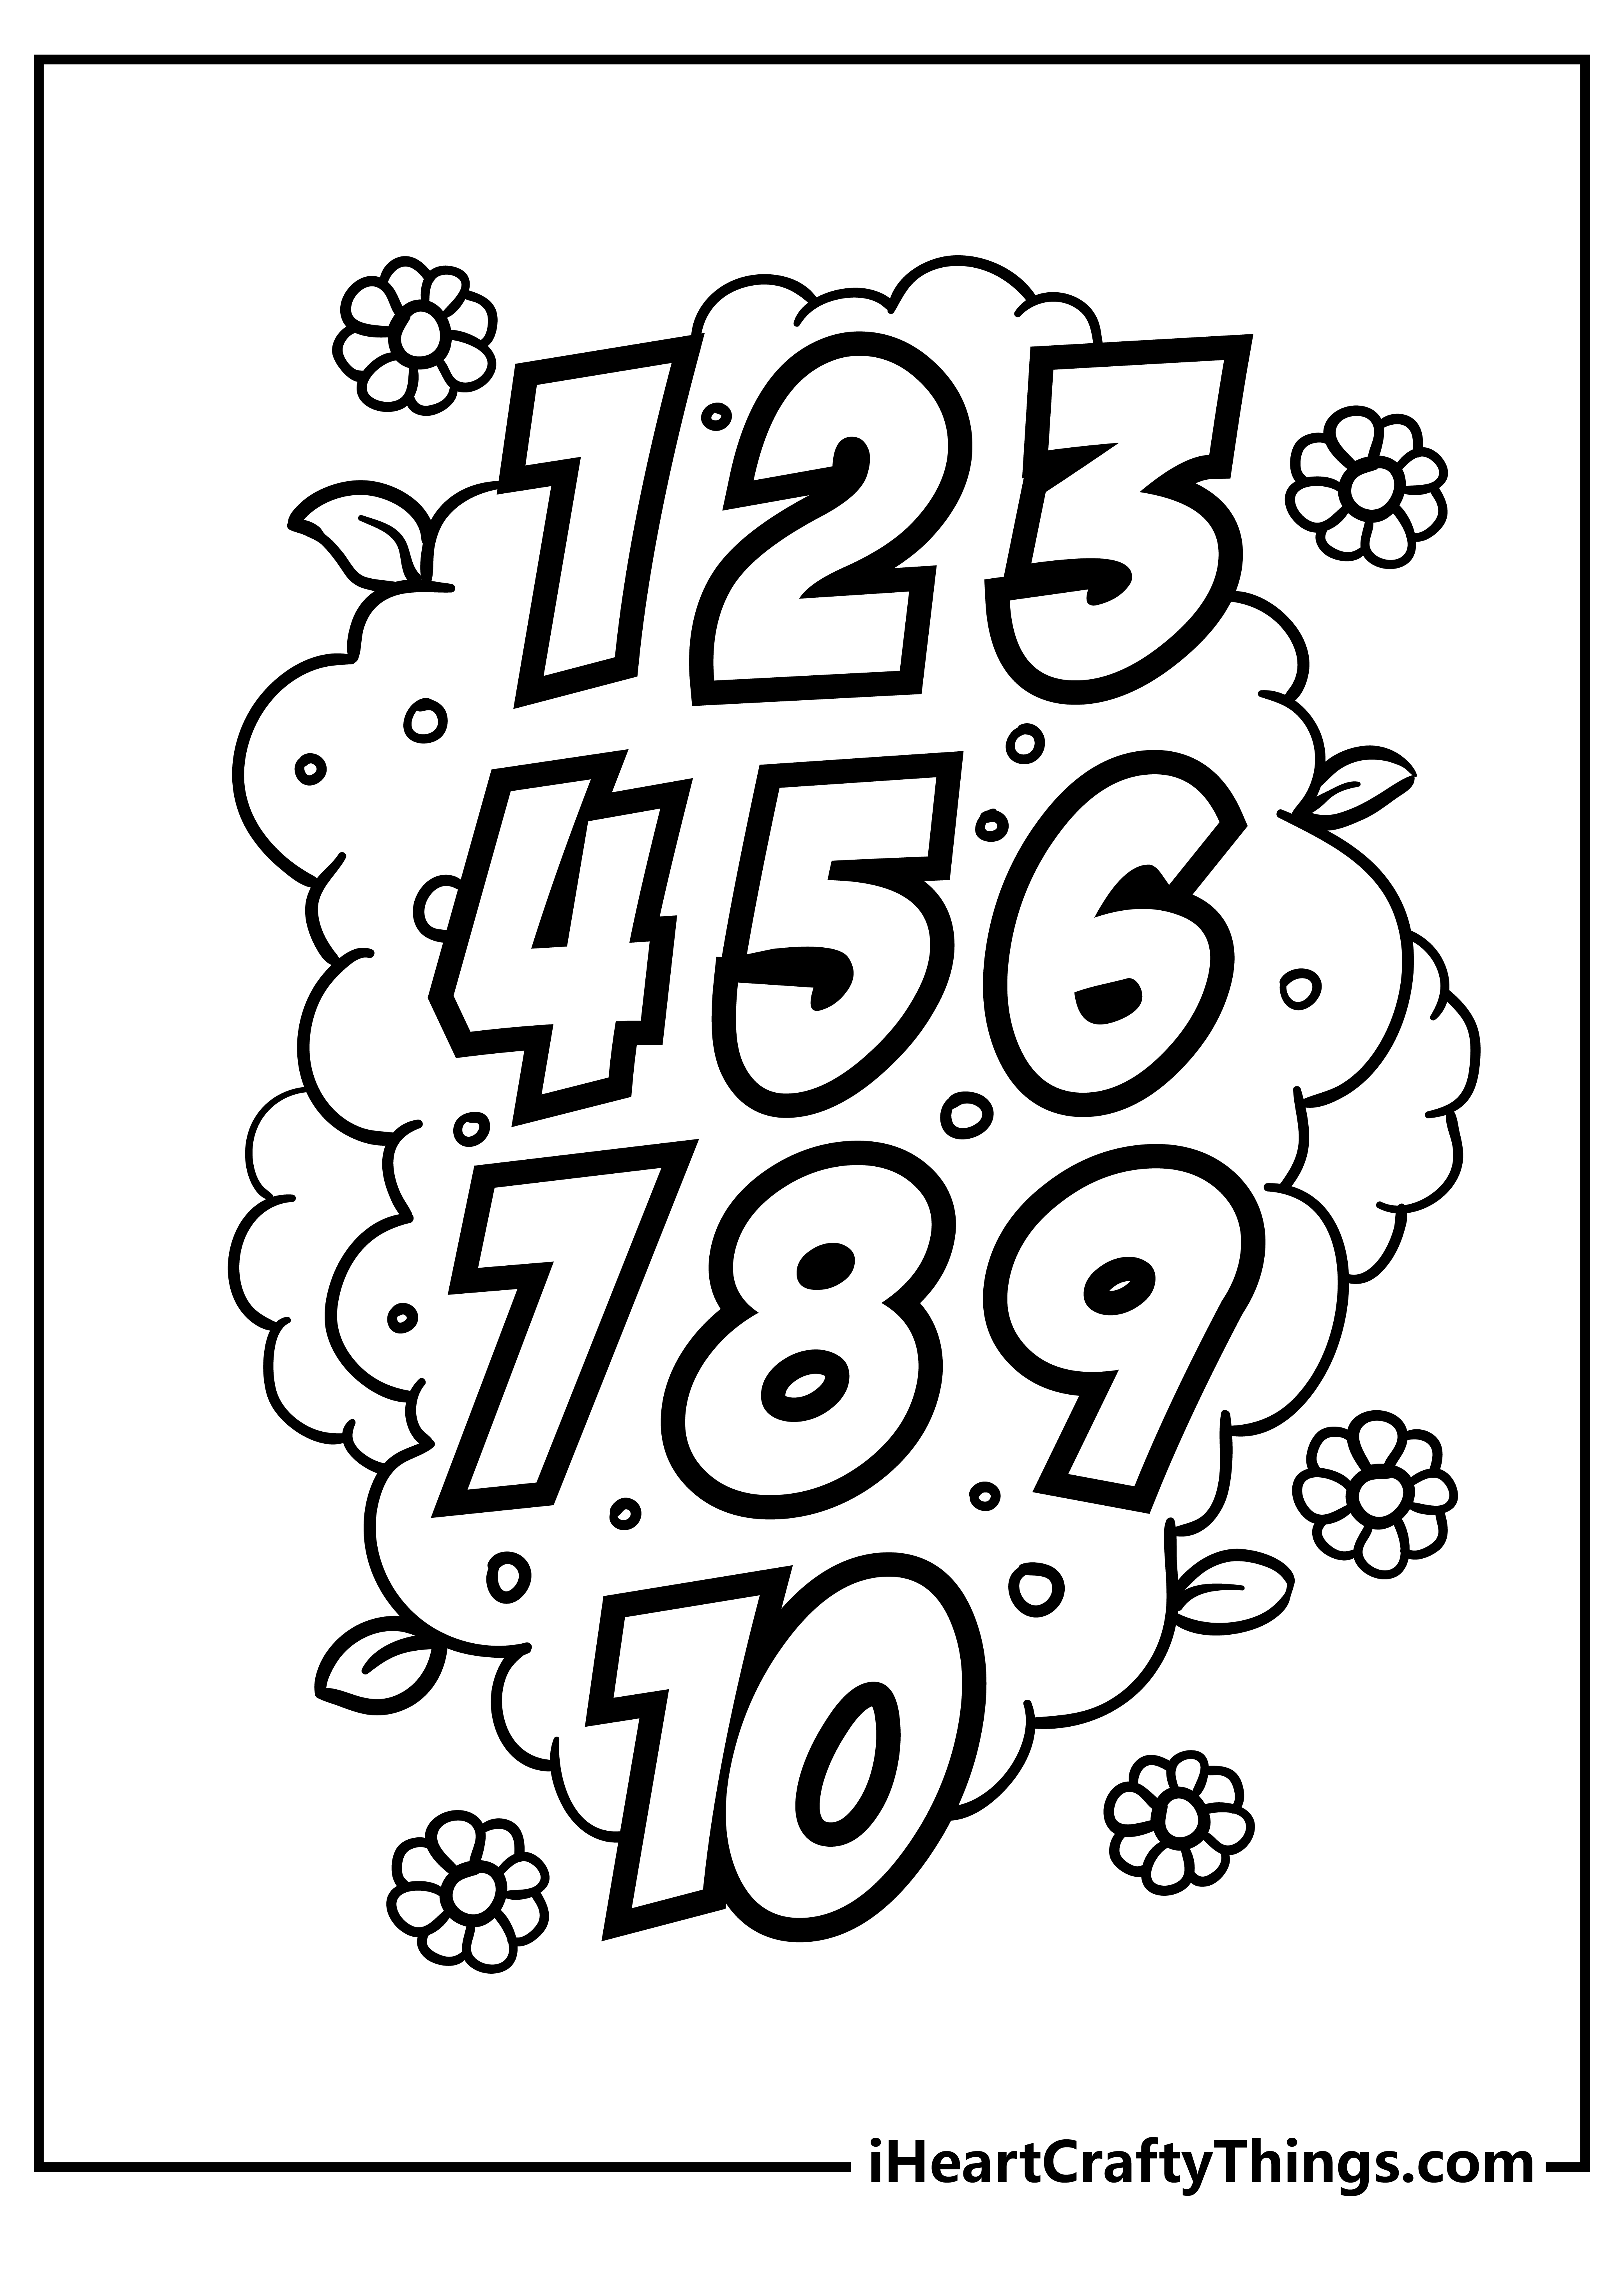 Number Coloring Pages for adults free printable